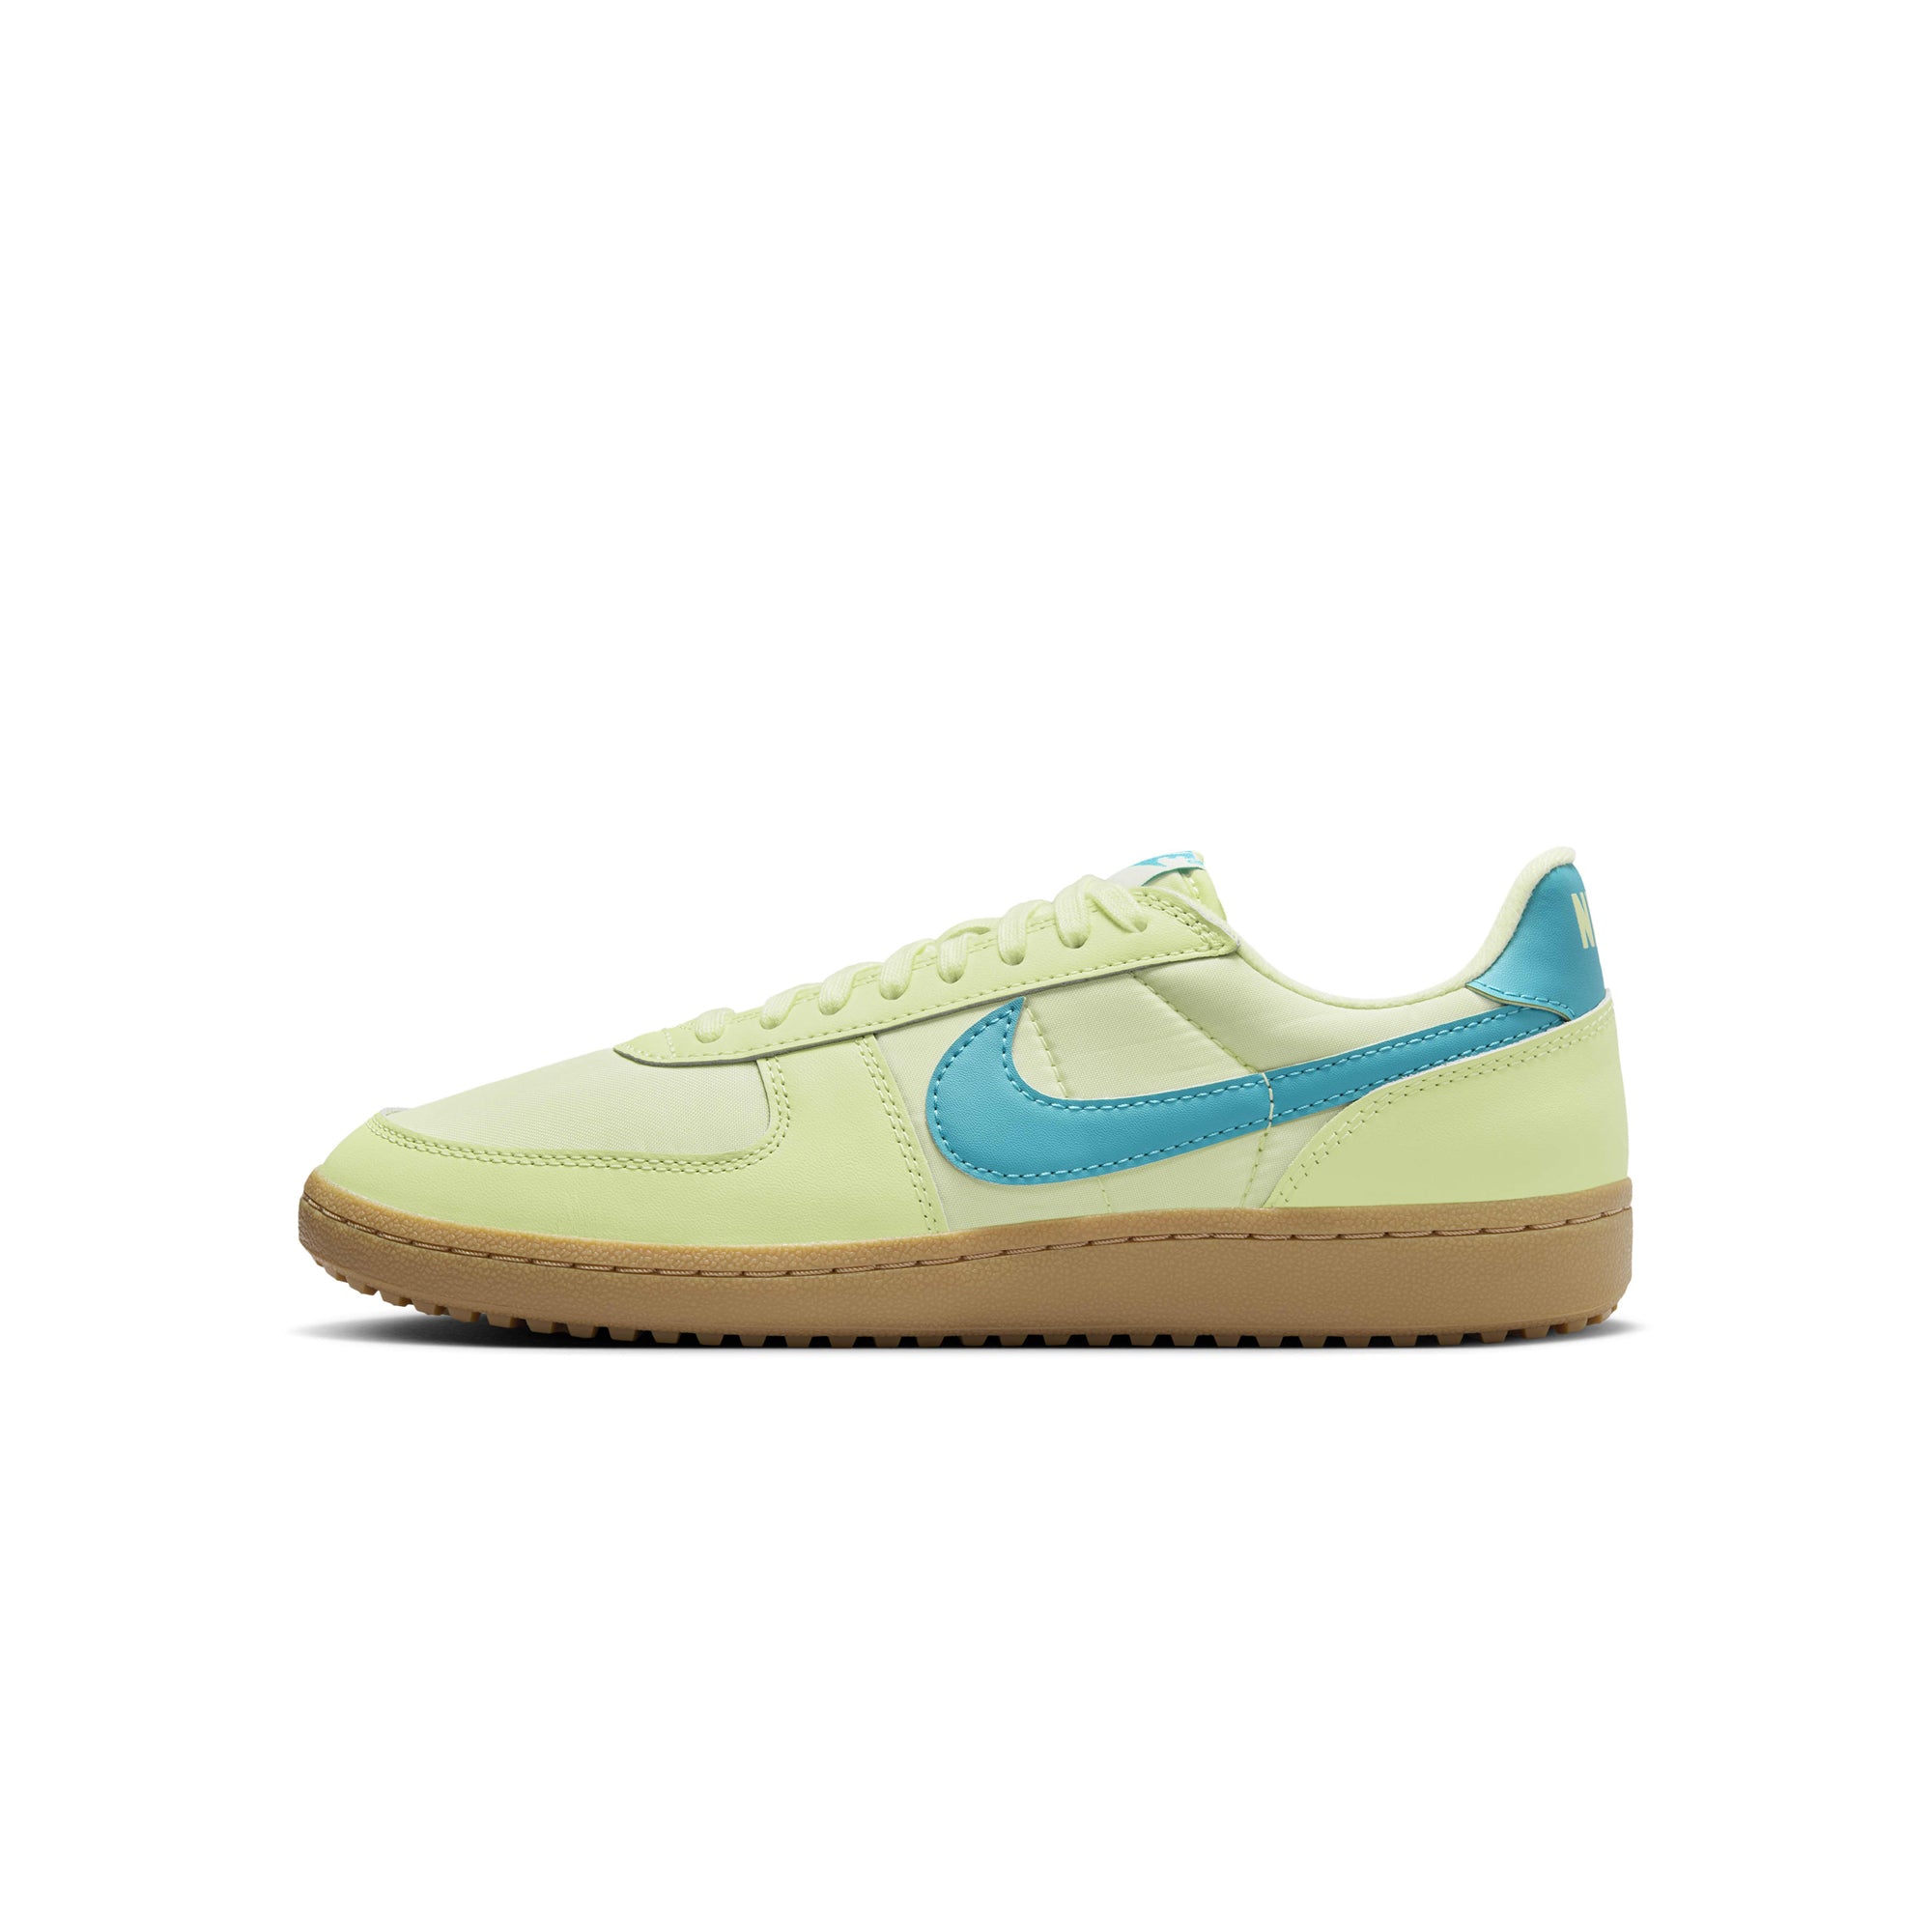 Nike Mens Field General '82 SP Shoes card image